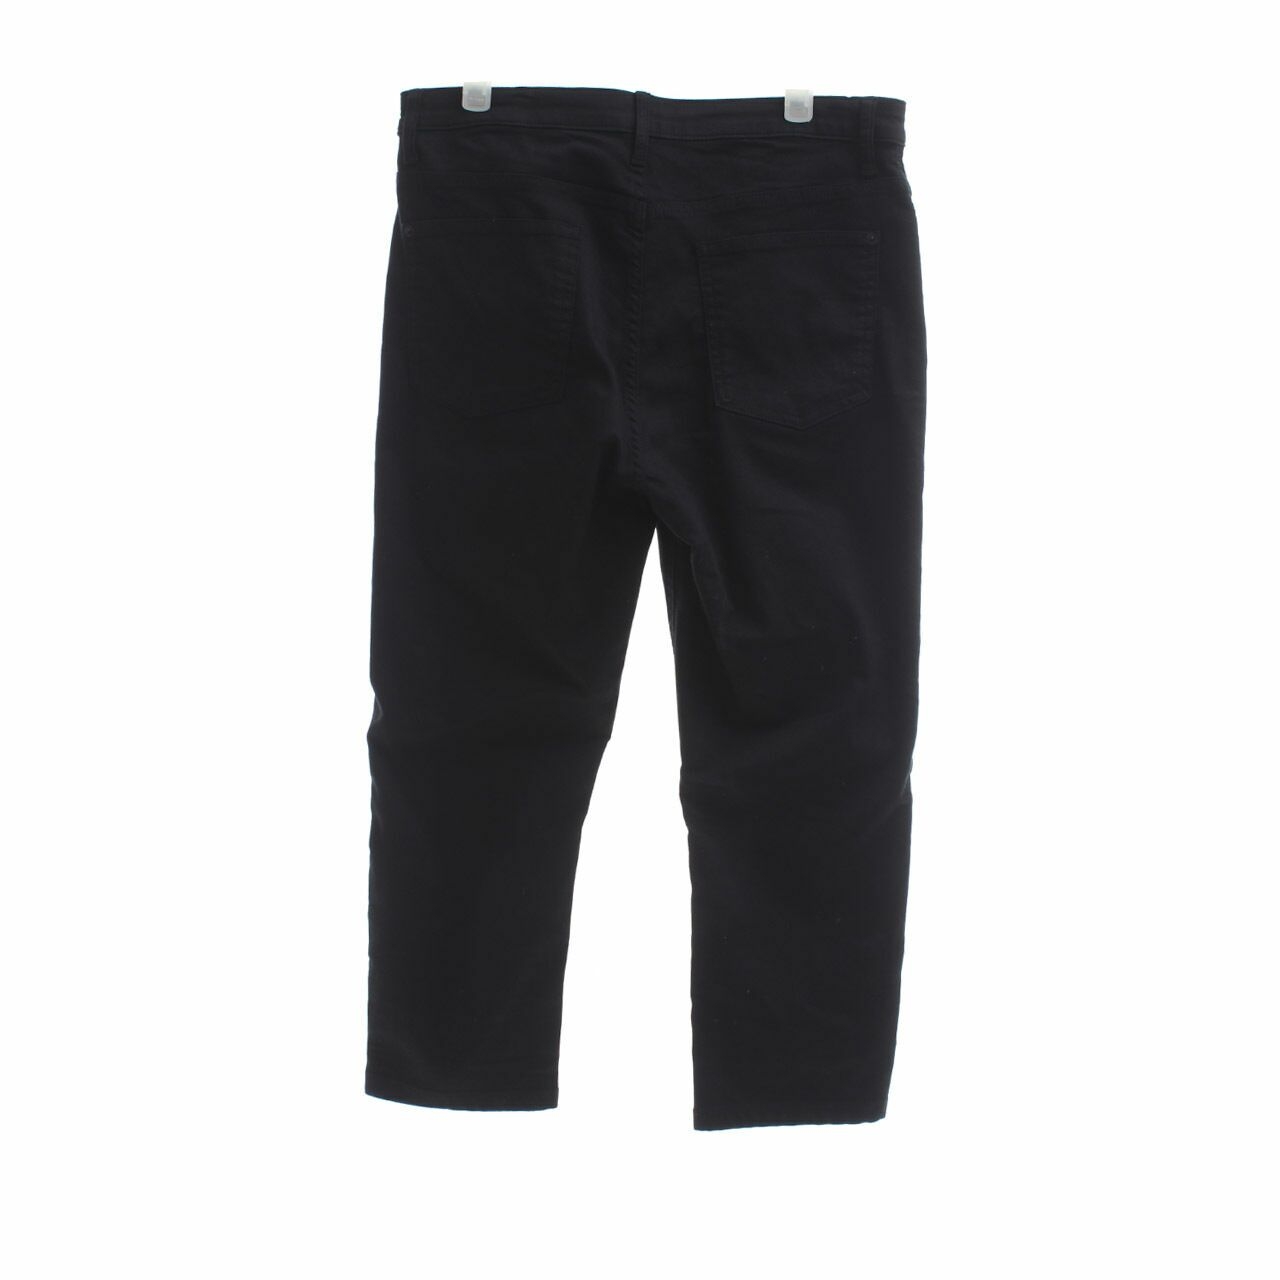 Marks & Spencer Collection Black Cropped Pants